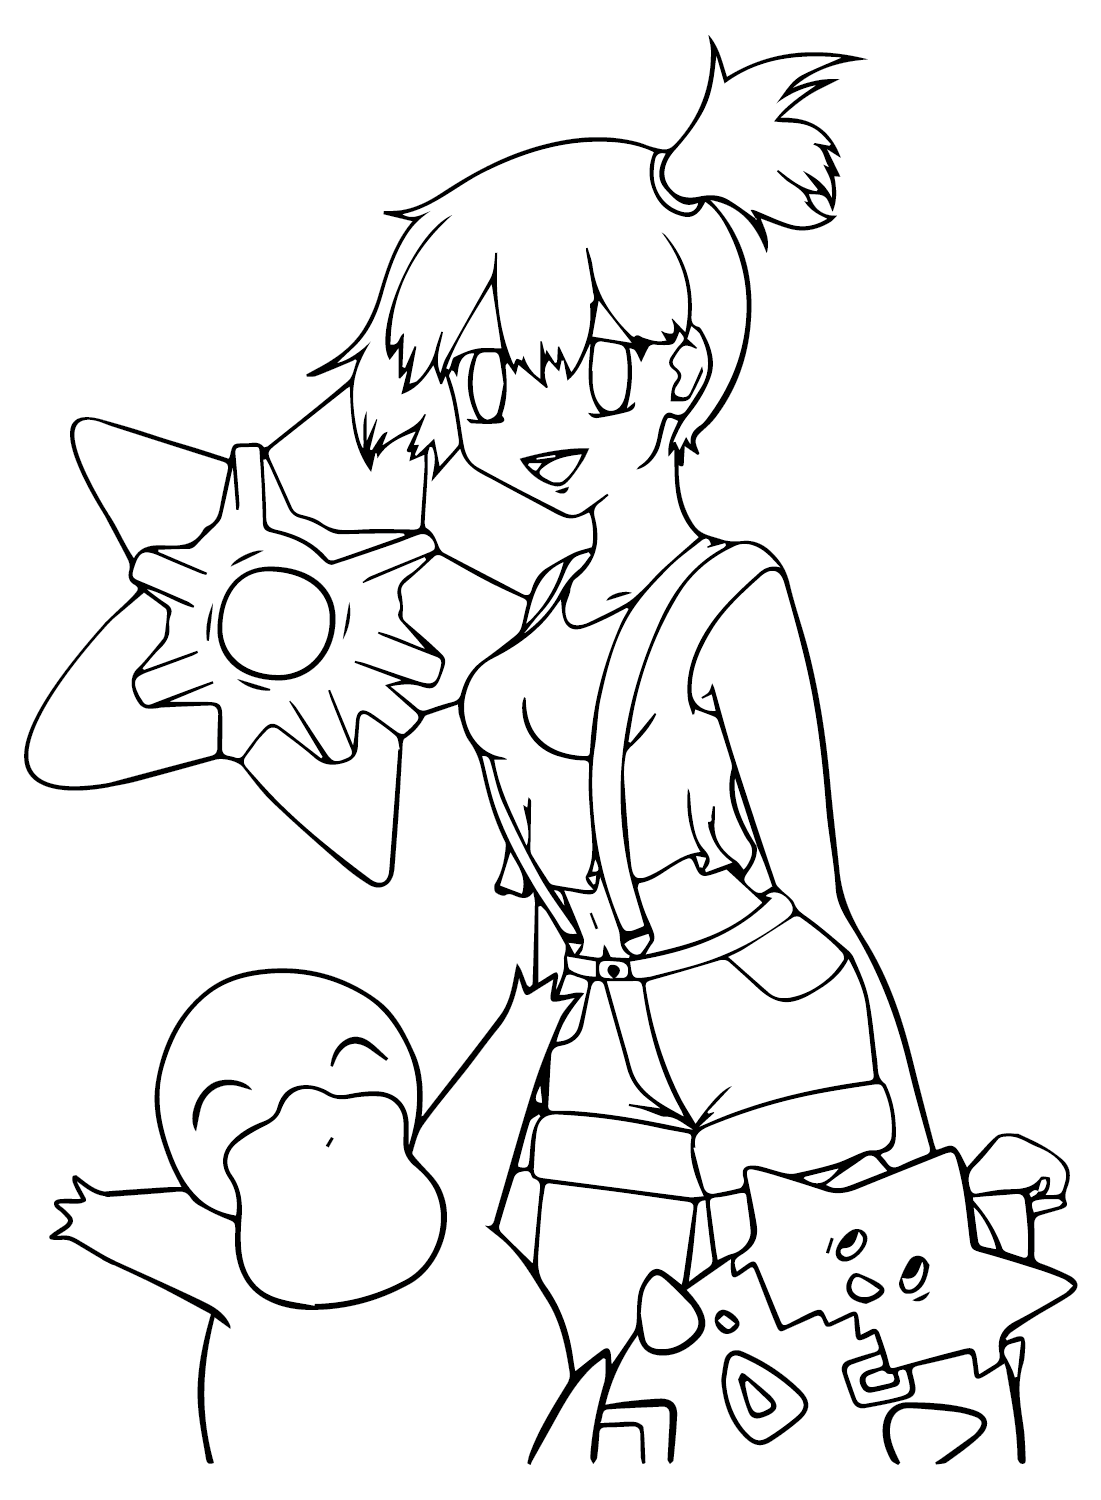 Misty and Pokemon Coloring Page from Misty